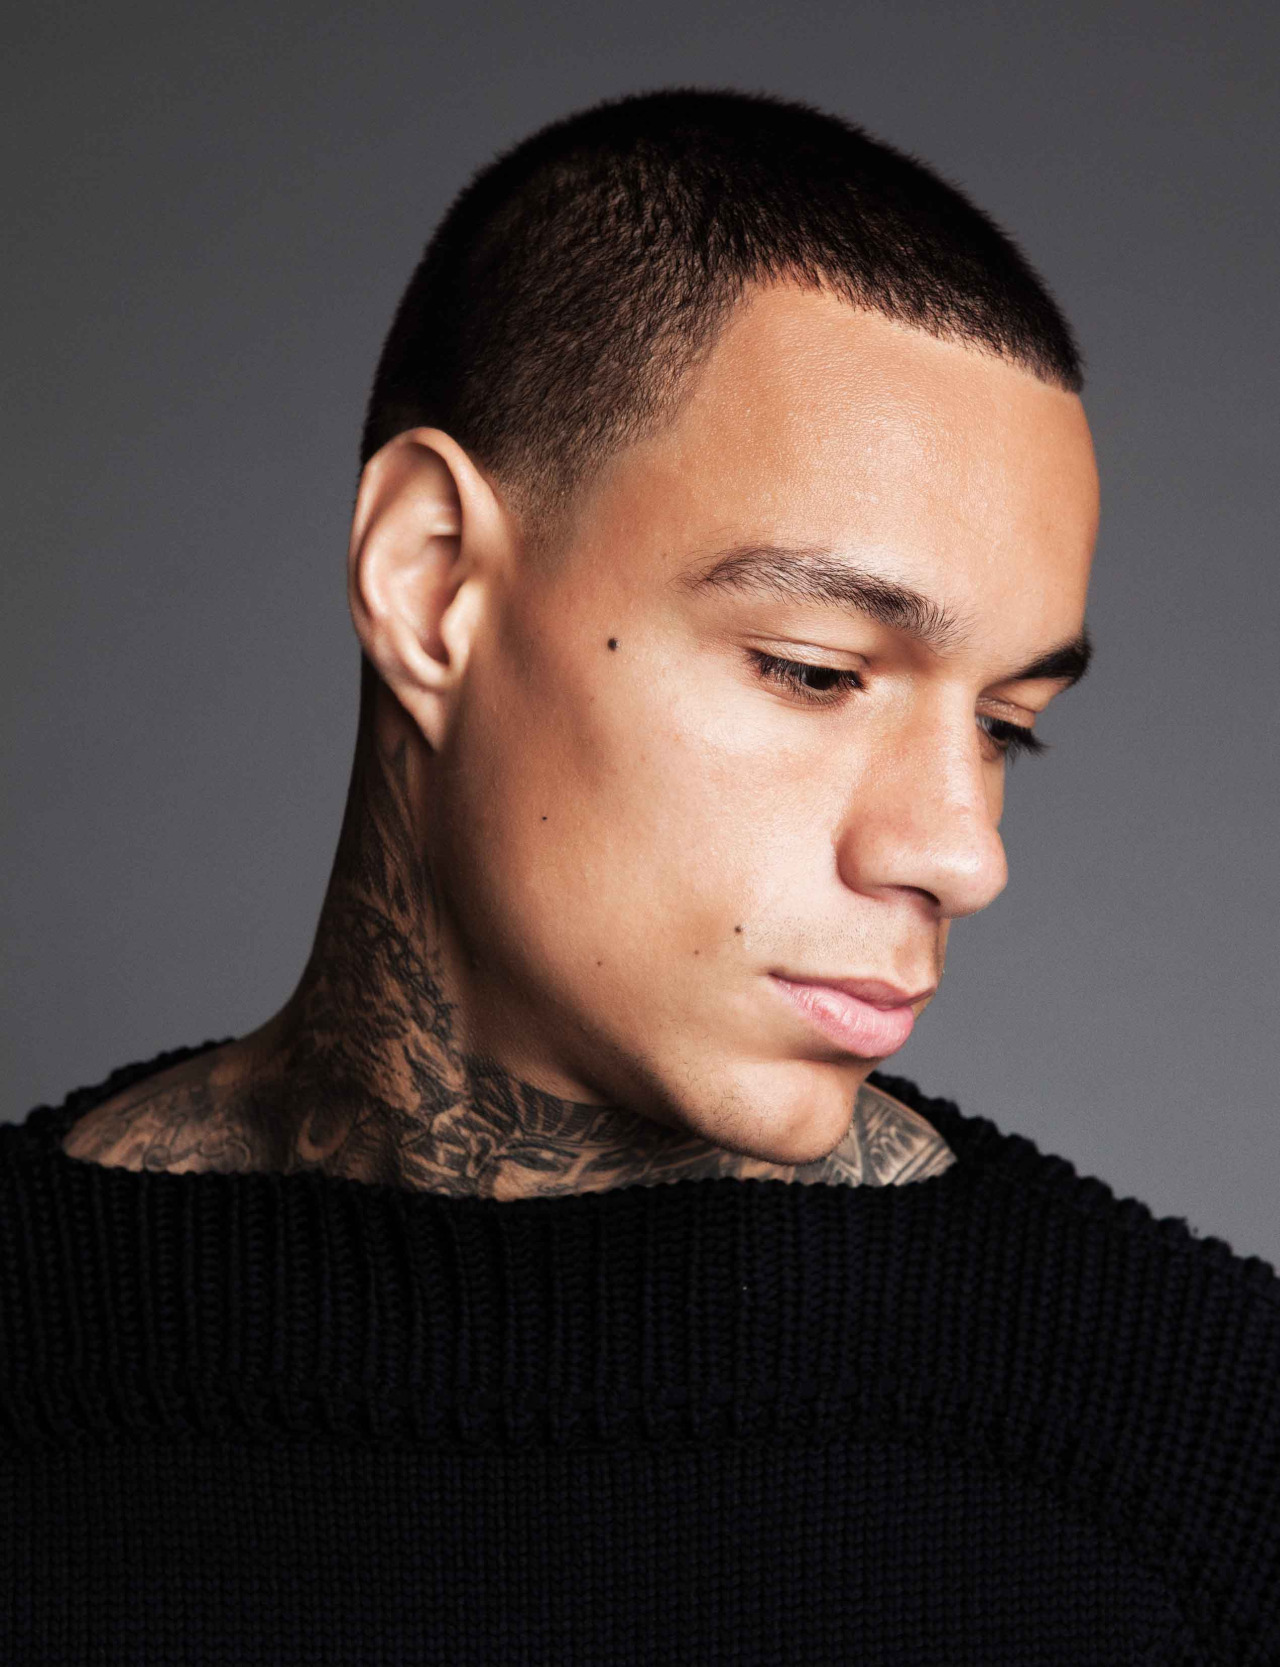 Gregory van der Wiel Goes High Fashion for Life After Football